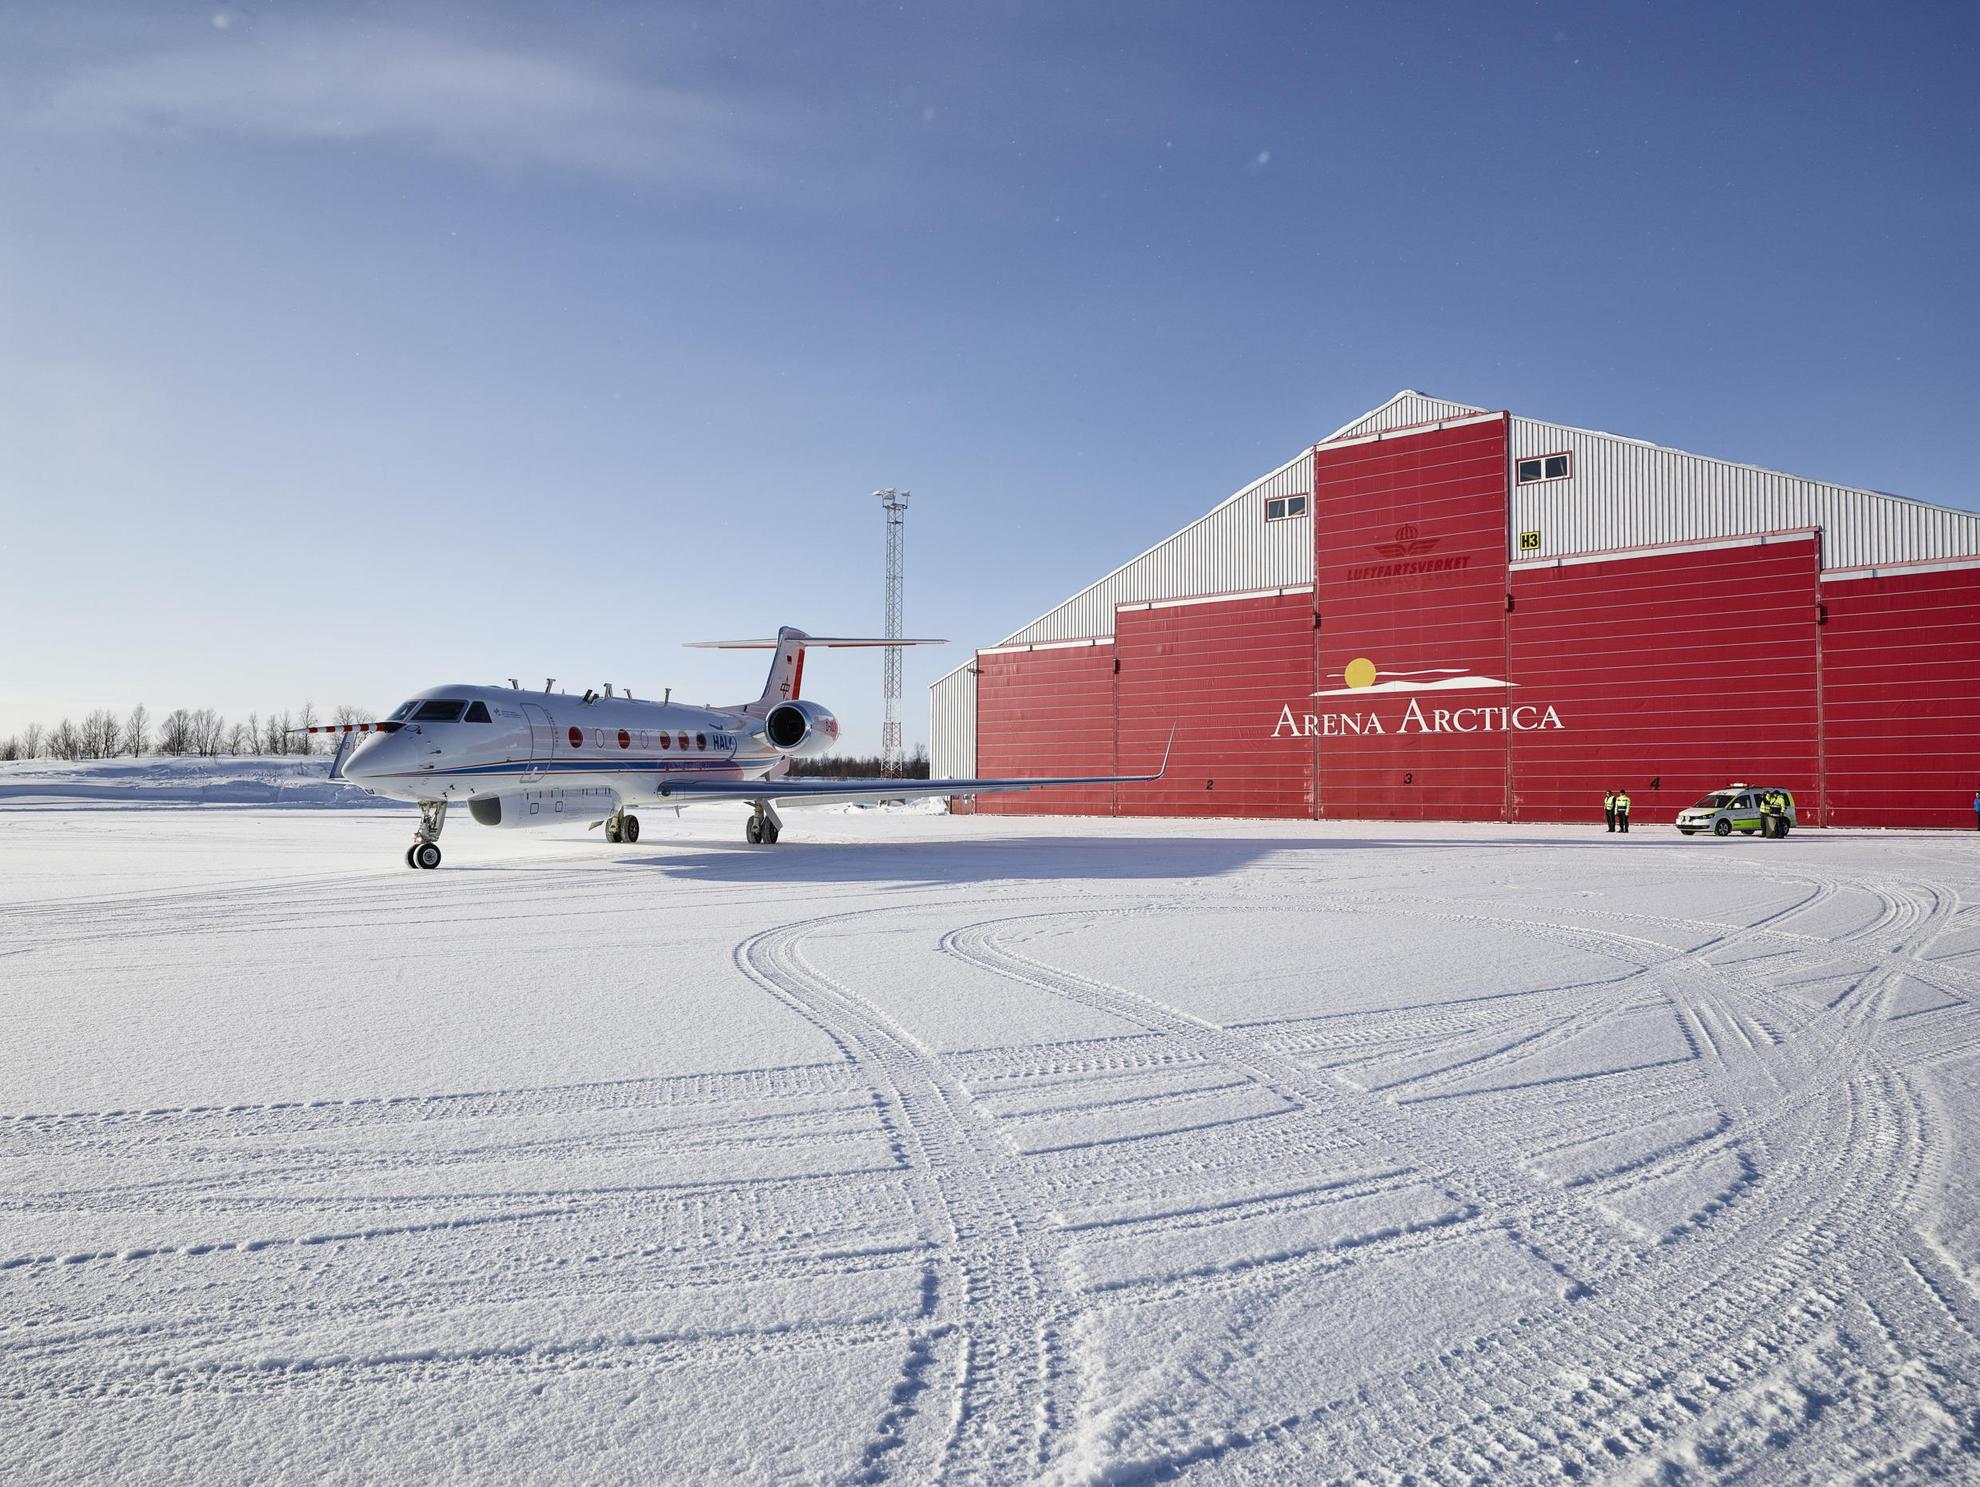 A jet plane sits on a snowy runway outside Arena Arctica in Kiruna on a sunny winter day.